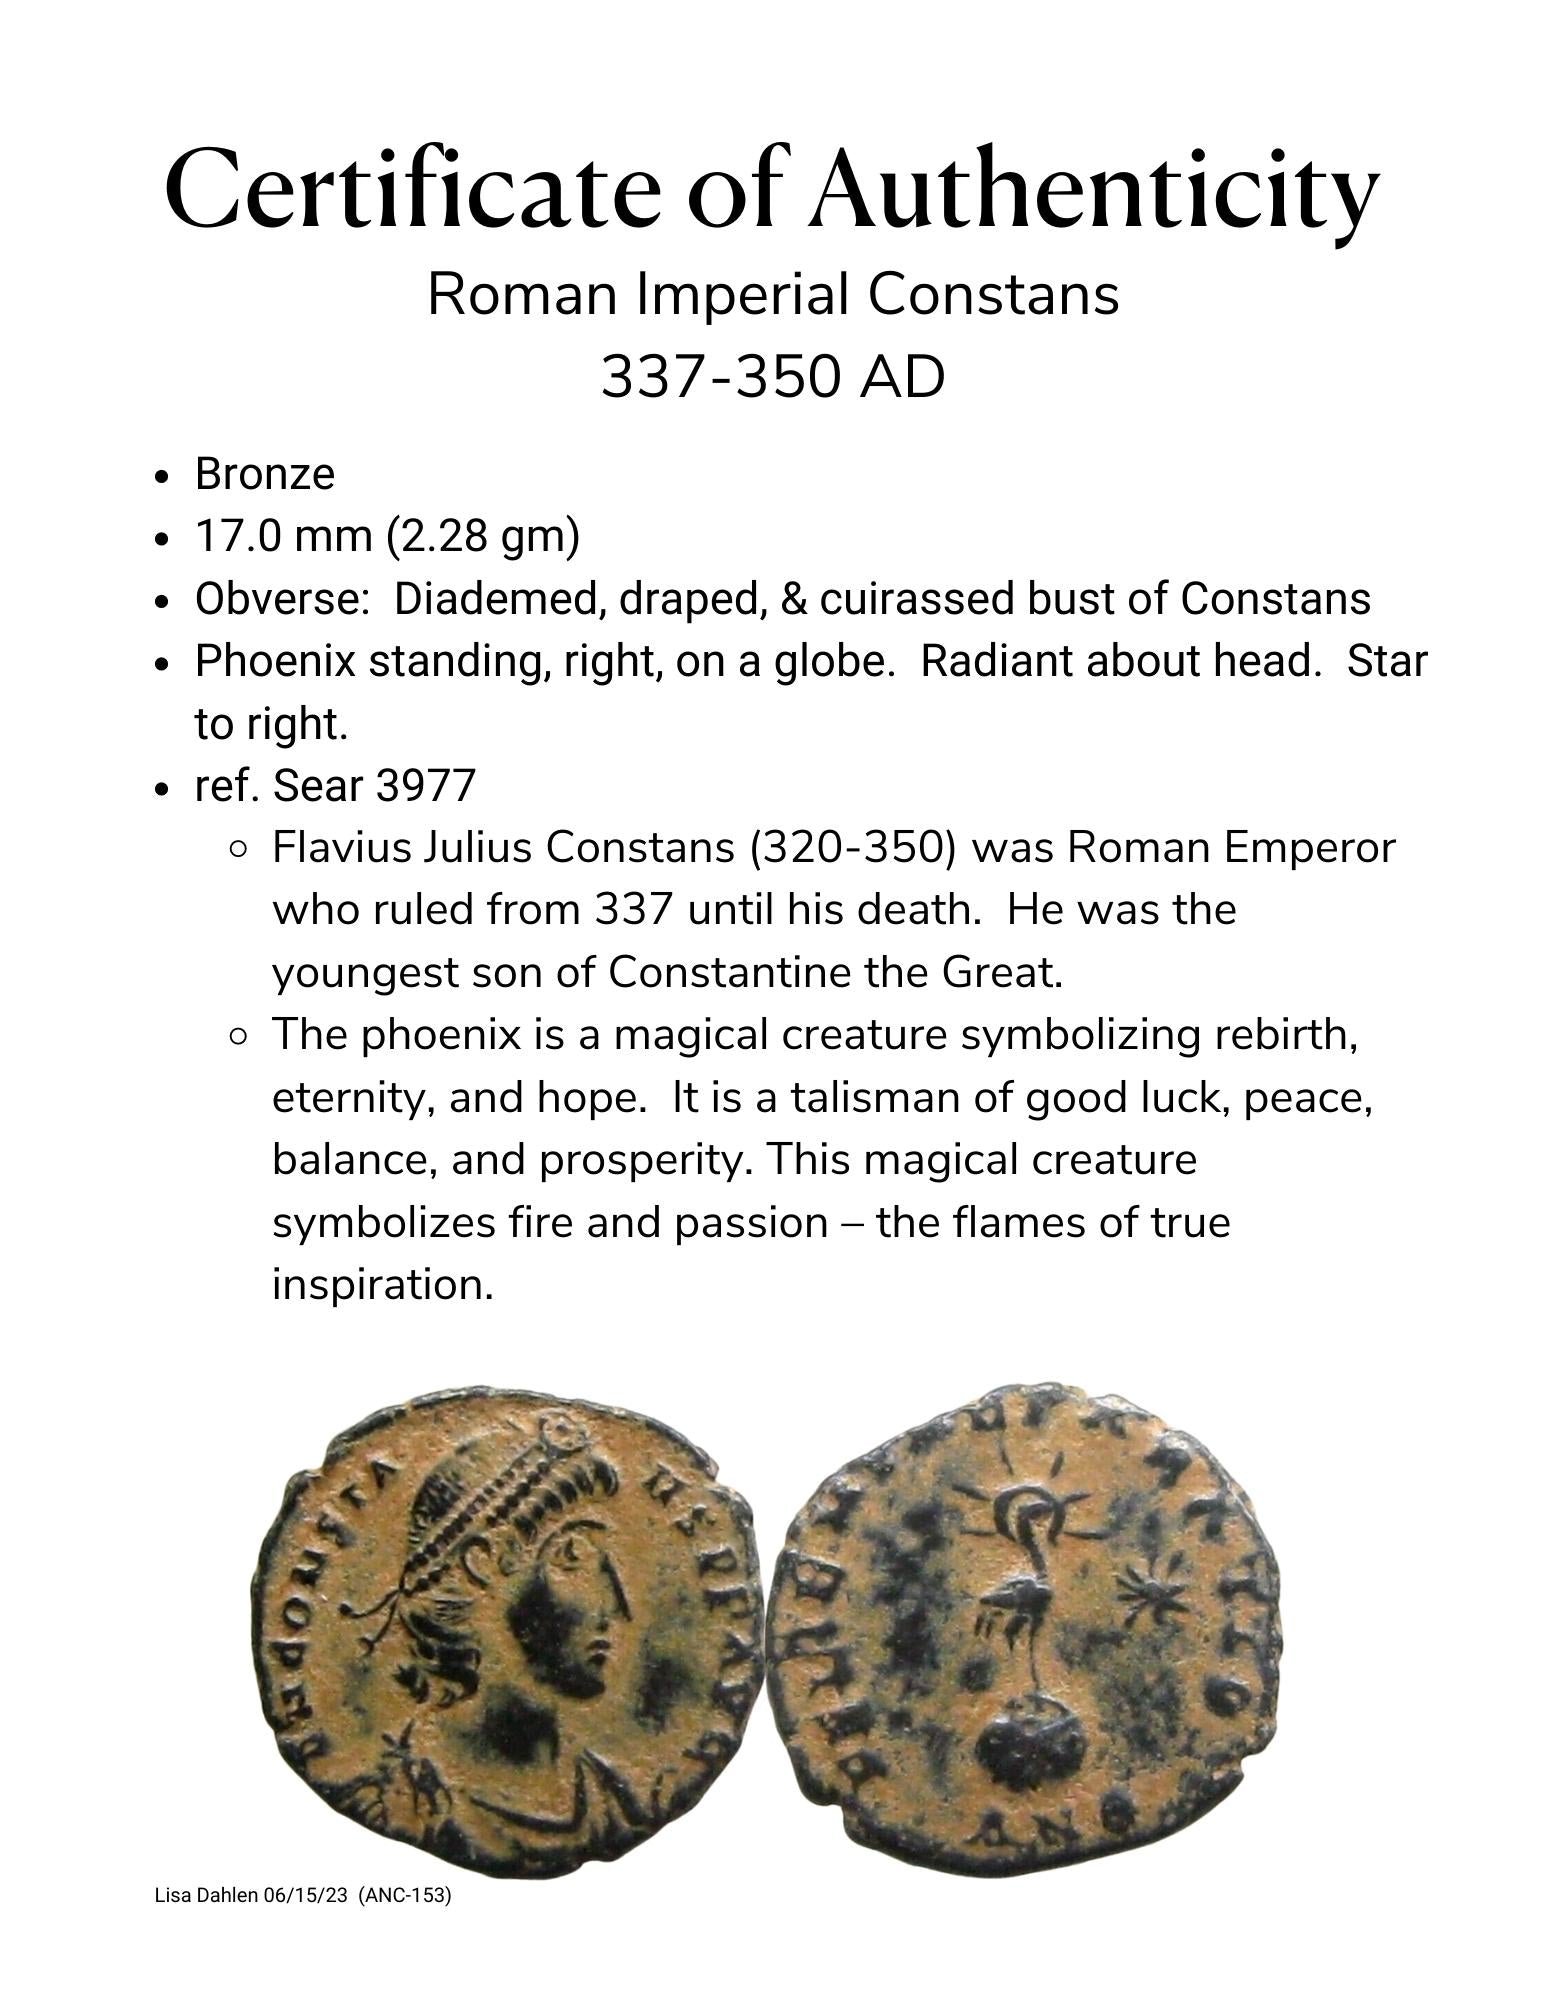 Certificate of authenticity of Roman Imperial ancient coin from 337-350 AD of Constans, youngest son of Constantine, and a Phoenix standing on a globe.